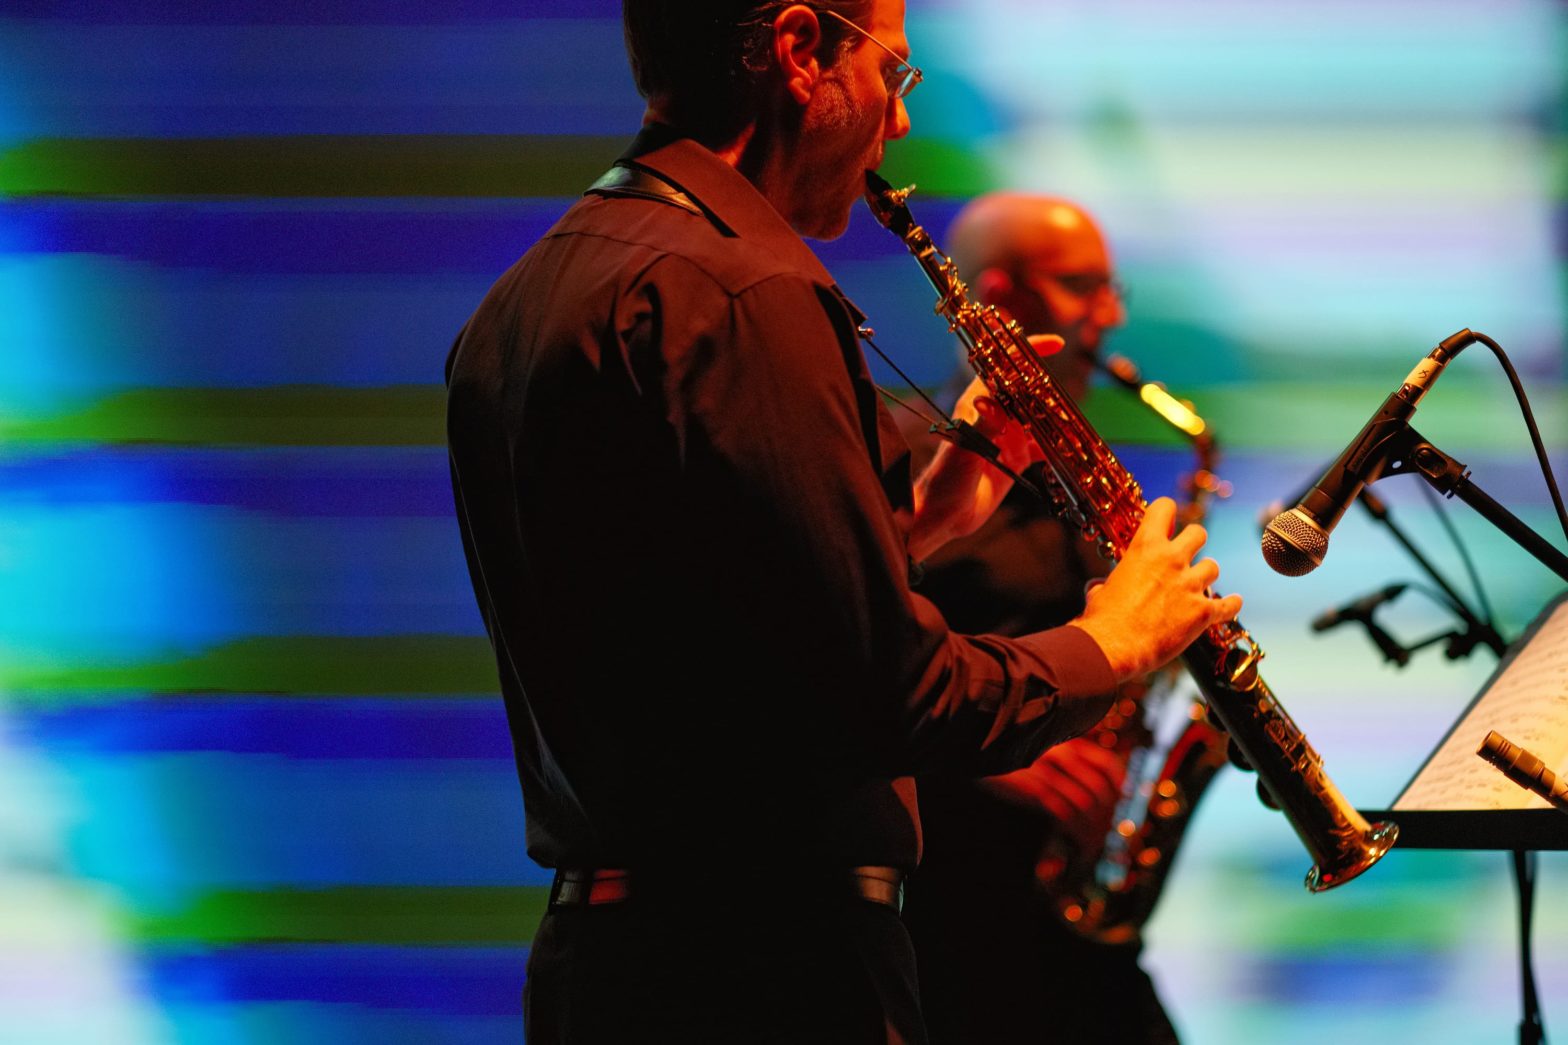 PRISM soprano saxophonist Timothy McAllister and alto saxophonist Zachary Shemon performing in front of a soft-focus blue and green video screen